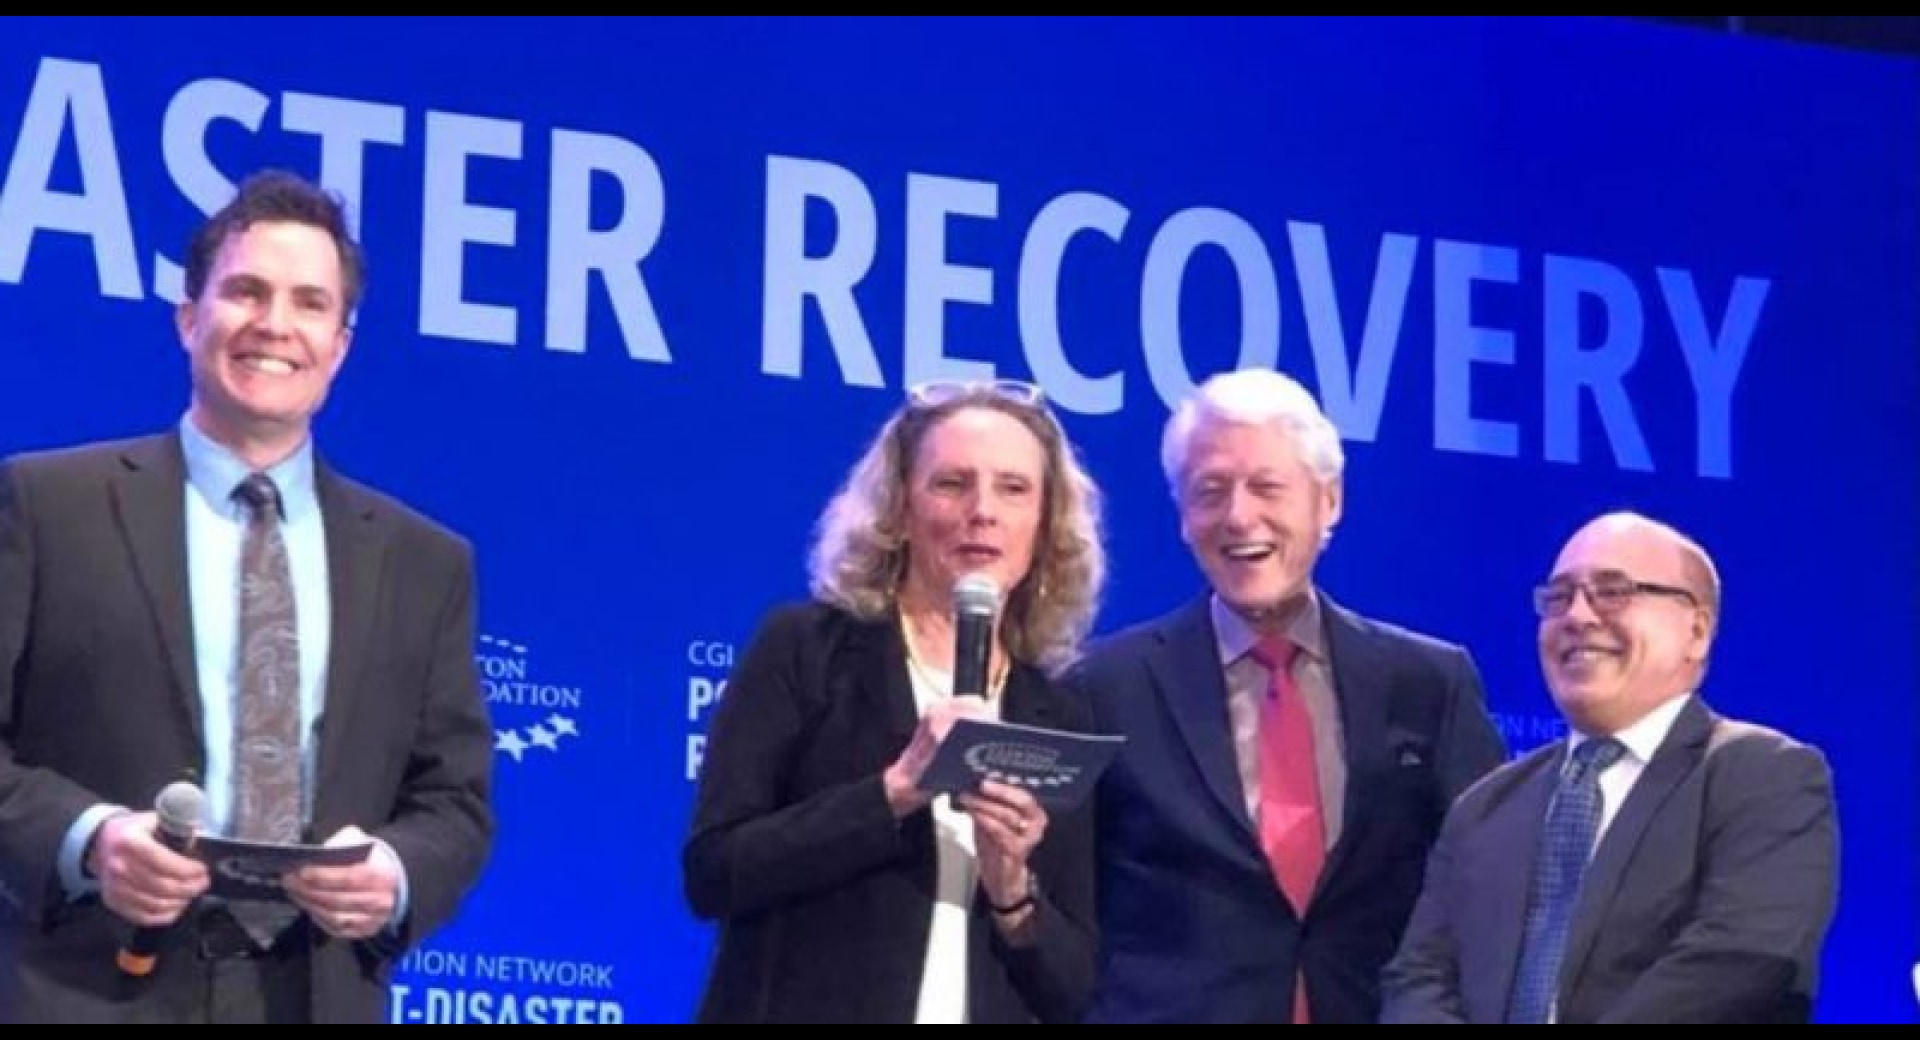 CFVI Presents at the Clinton Global Initiative (CGI) Action Network in Puerto Rico